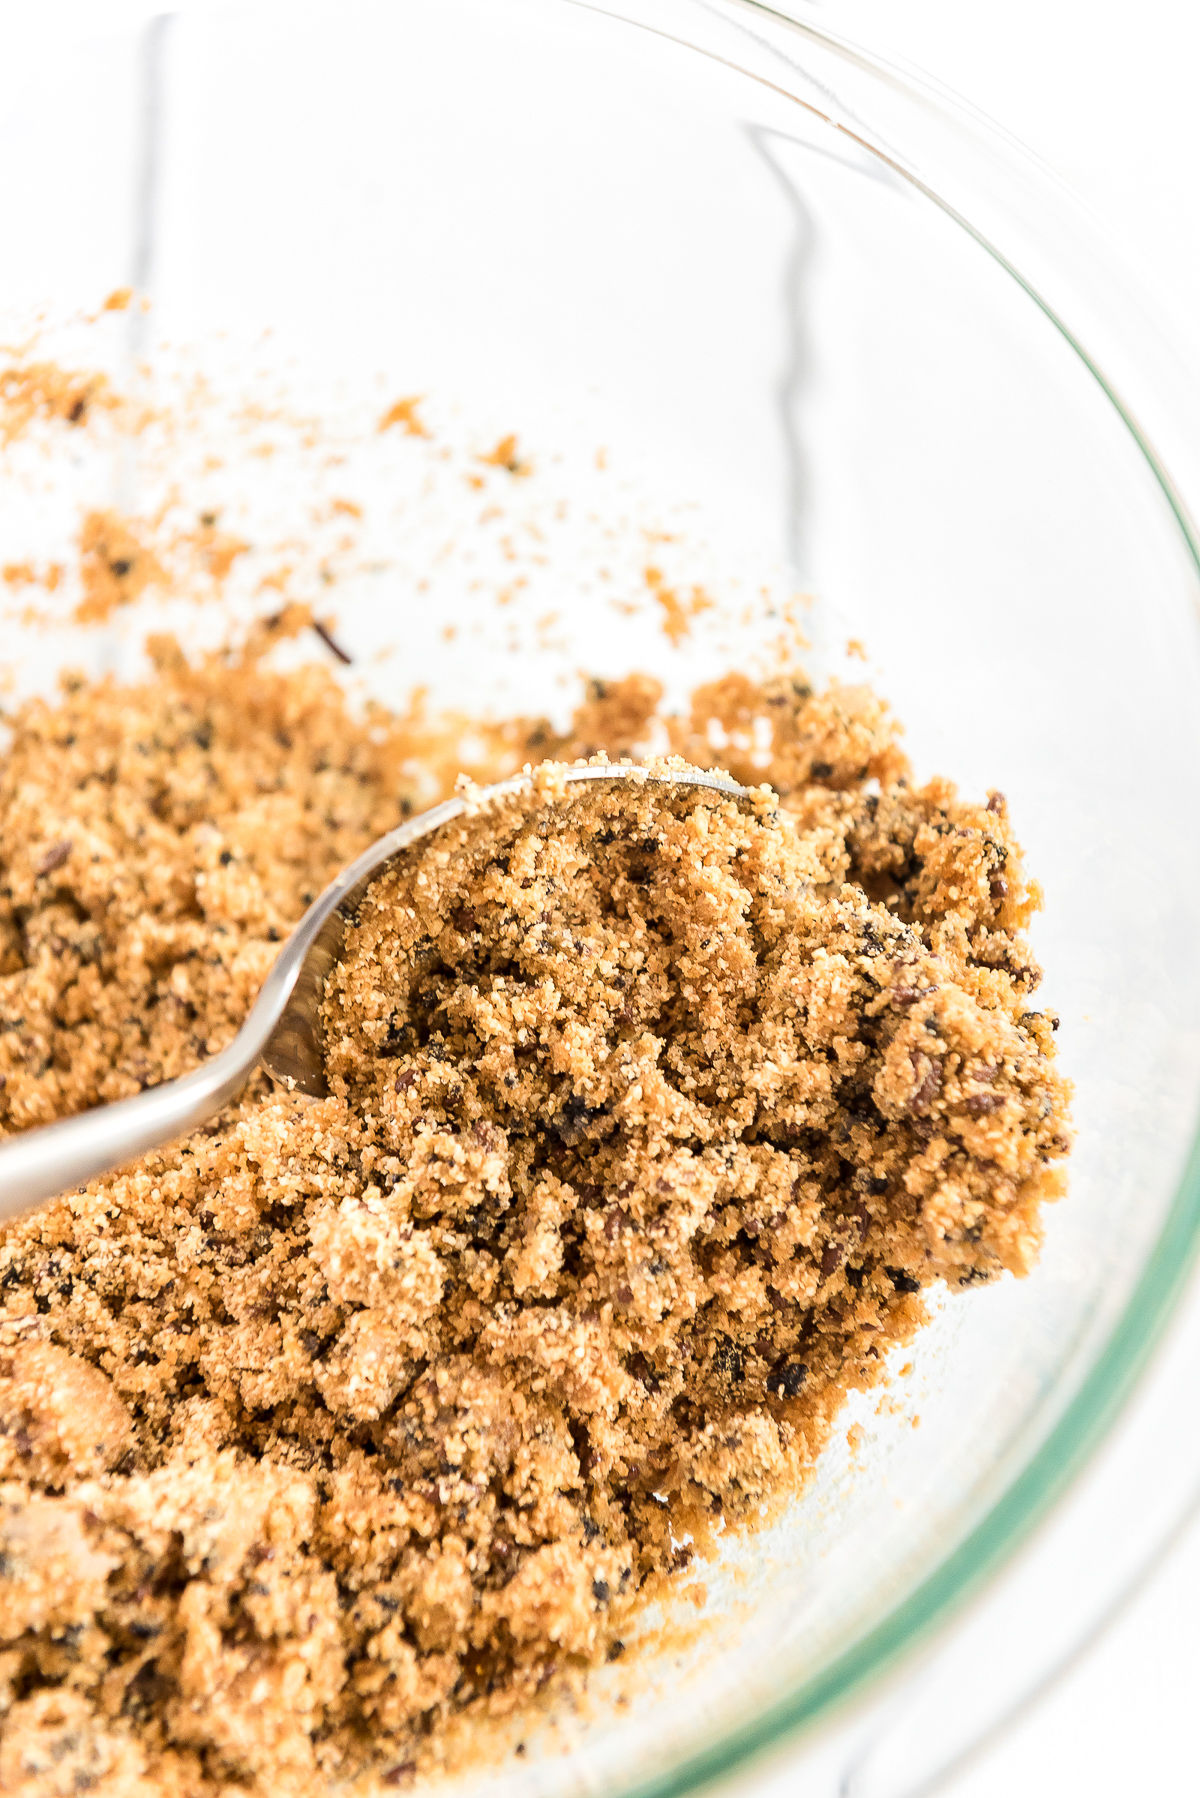 Graham cracker crumbs to make crust in a mixing bowl with a spoon.